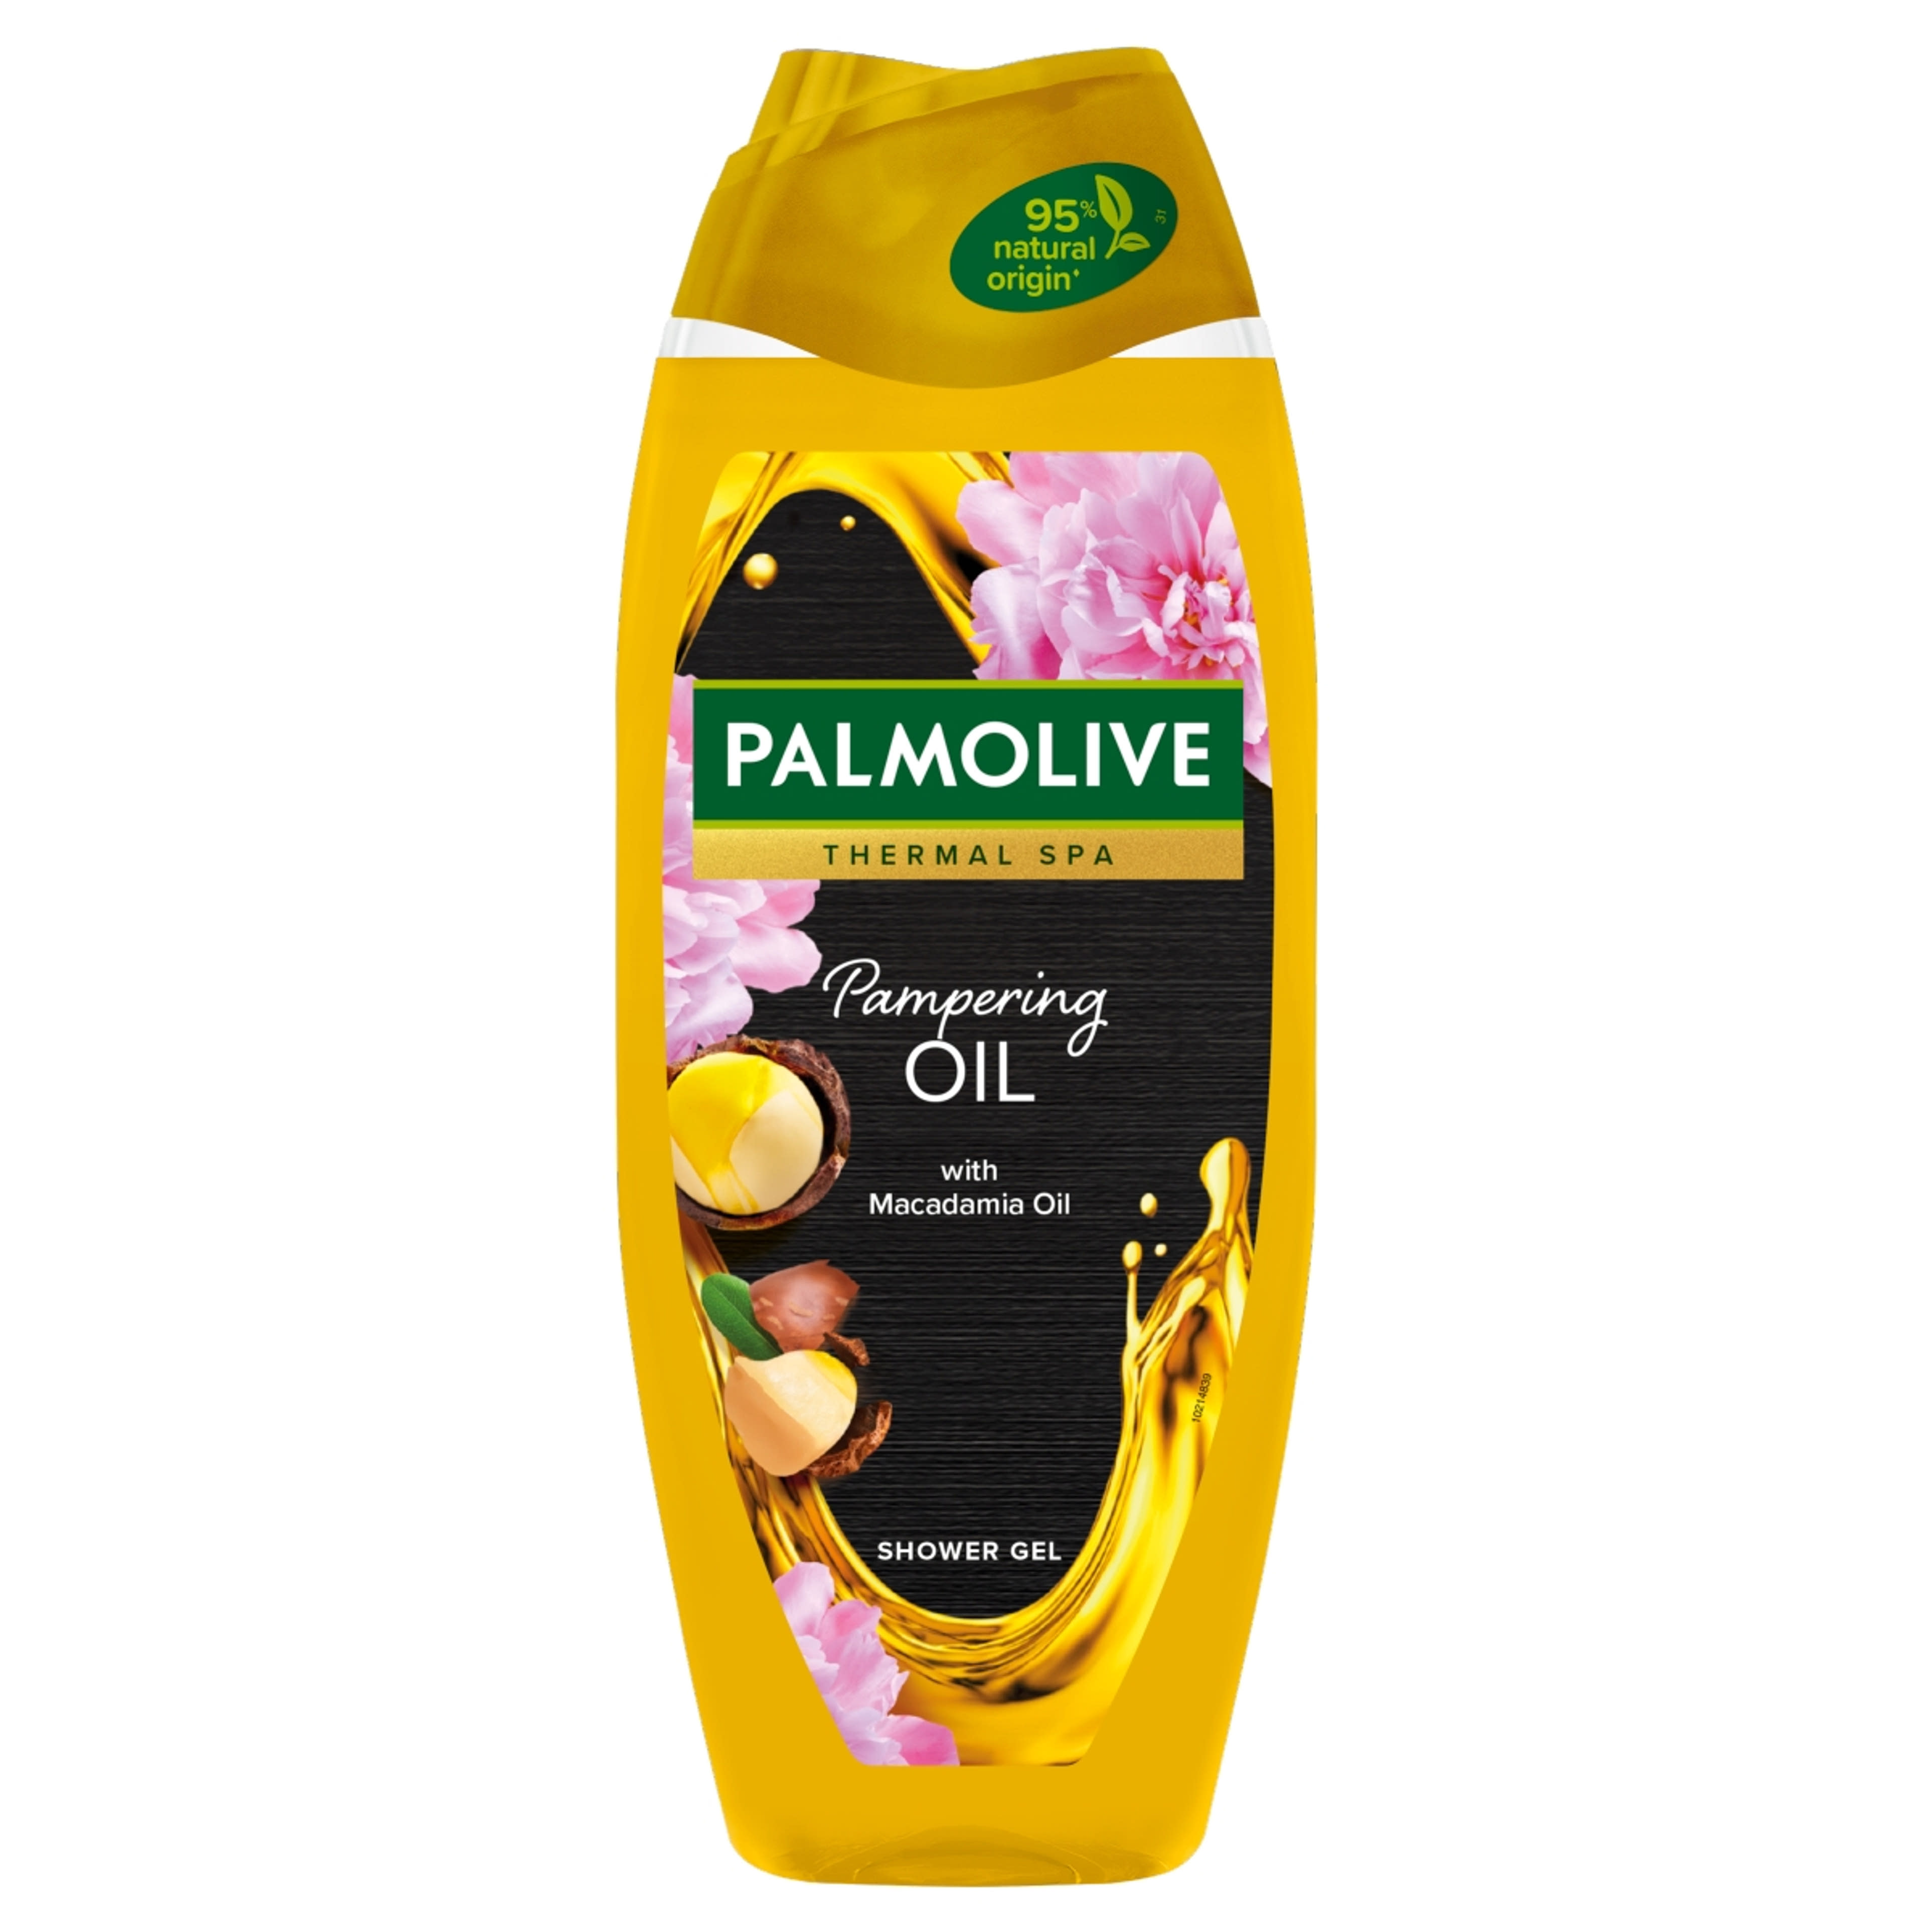 Palmolive Thermal Spa Pampering Oil tusfürdő - 500 ml